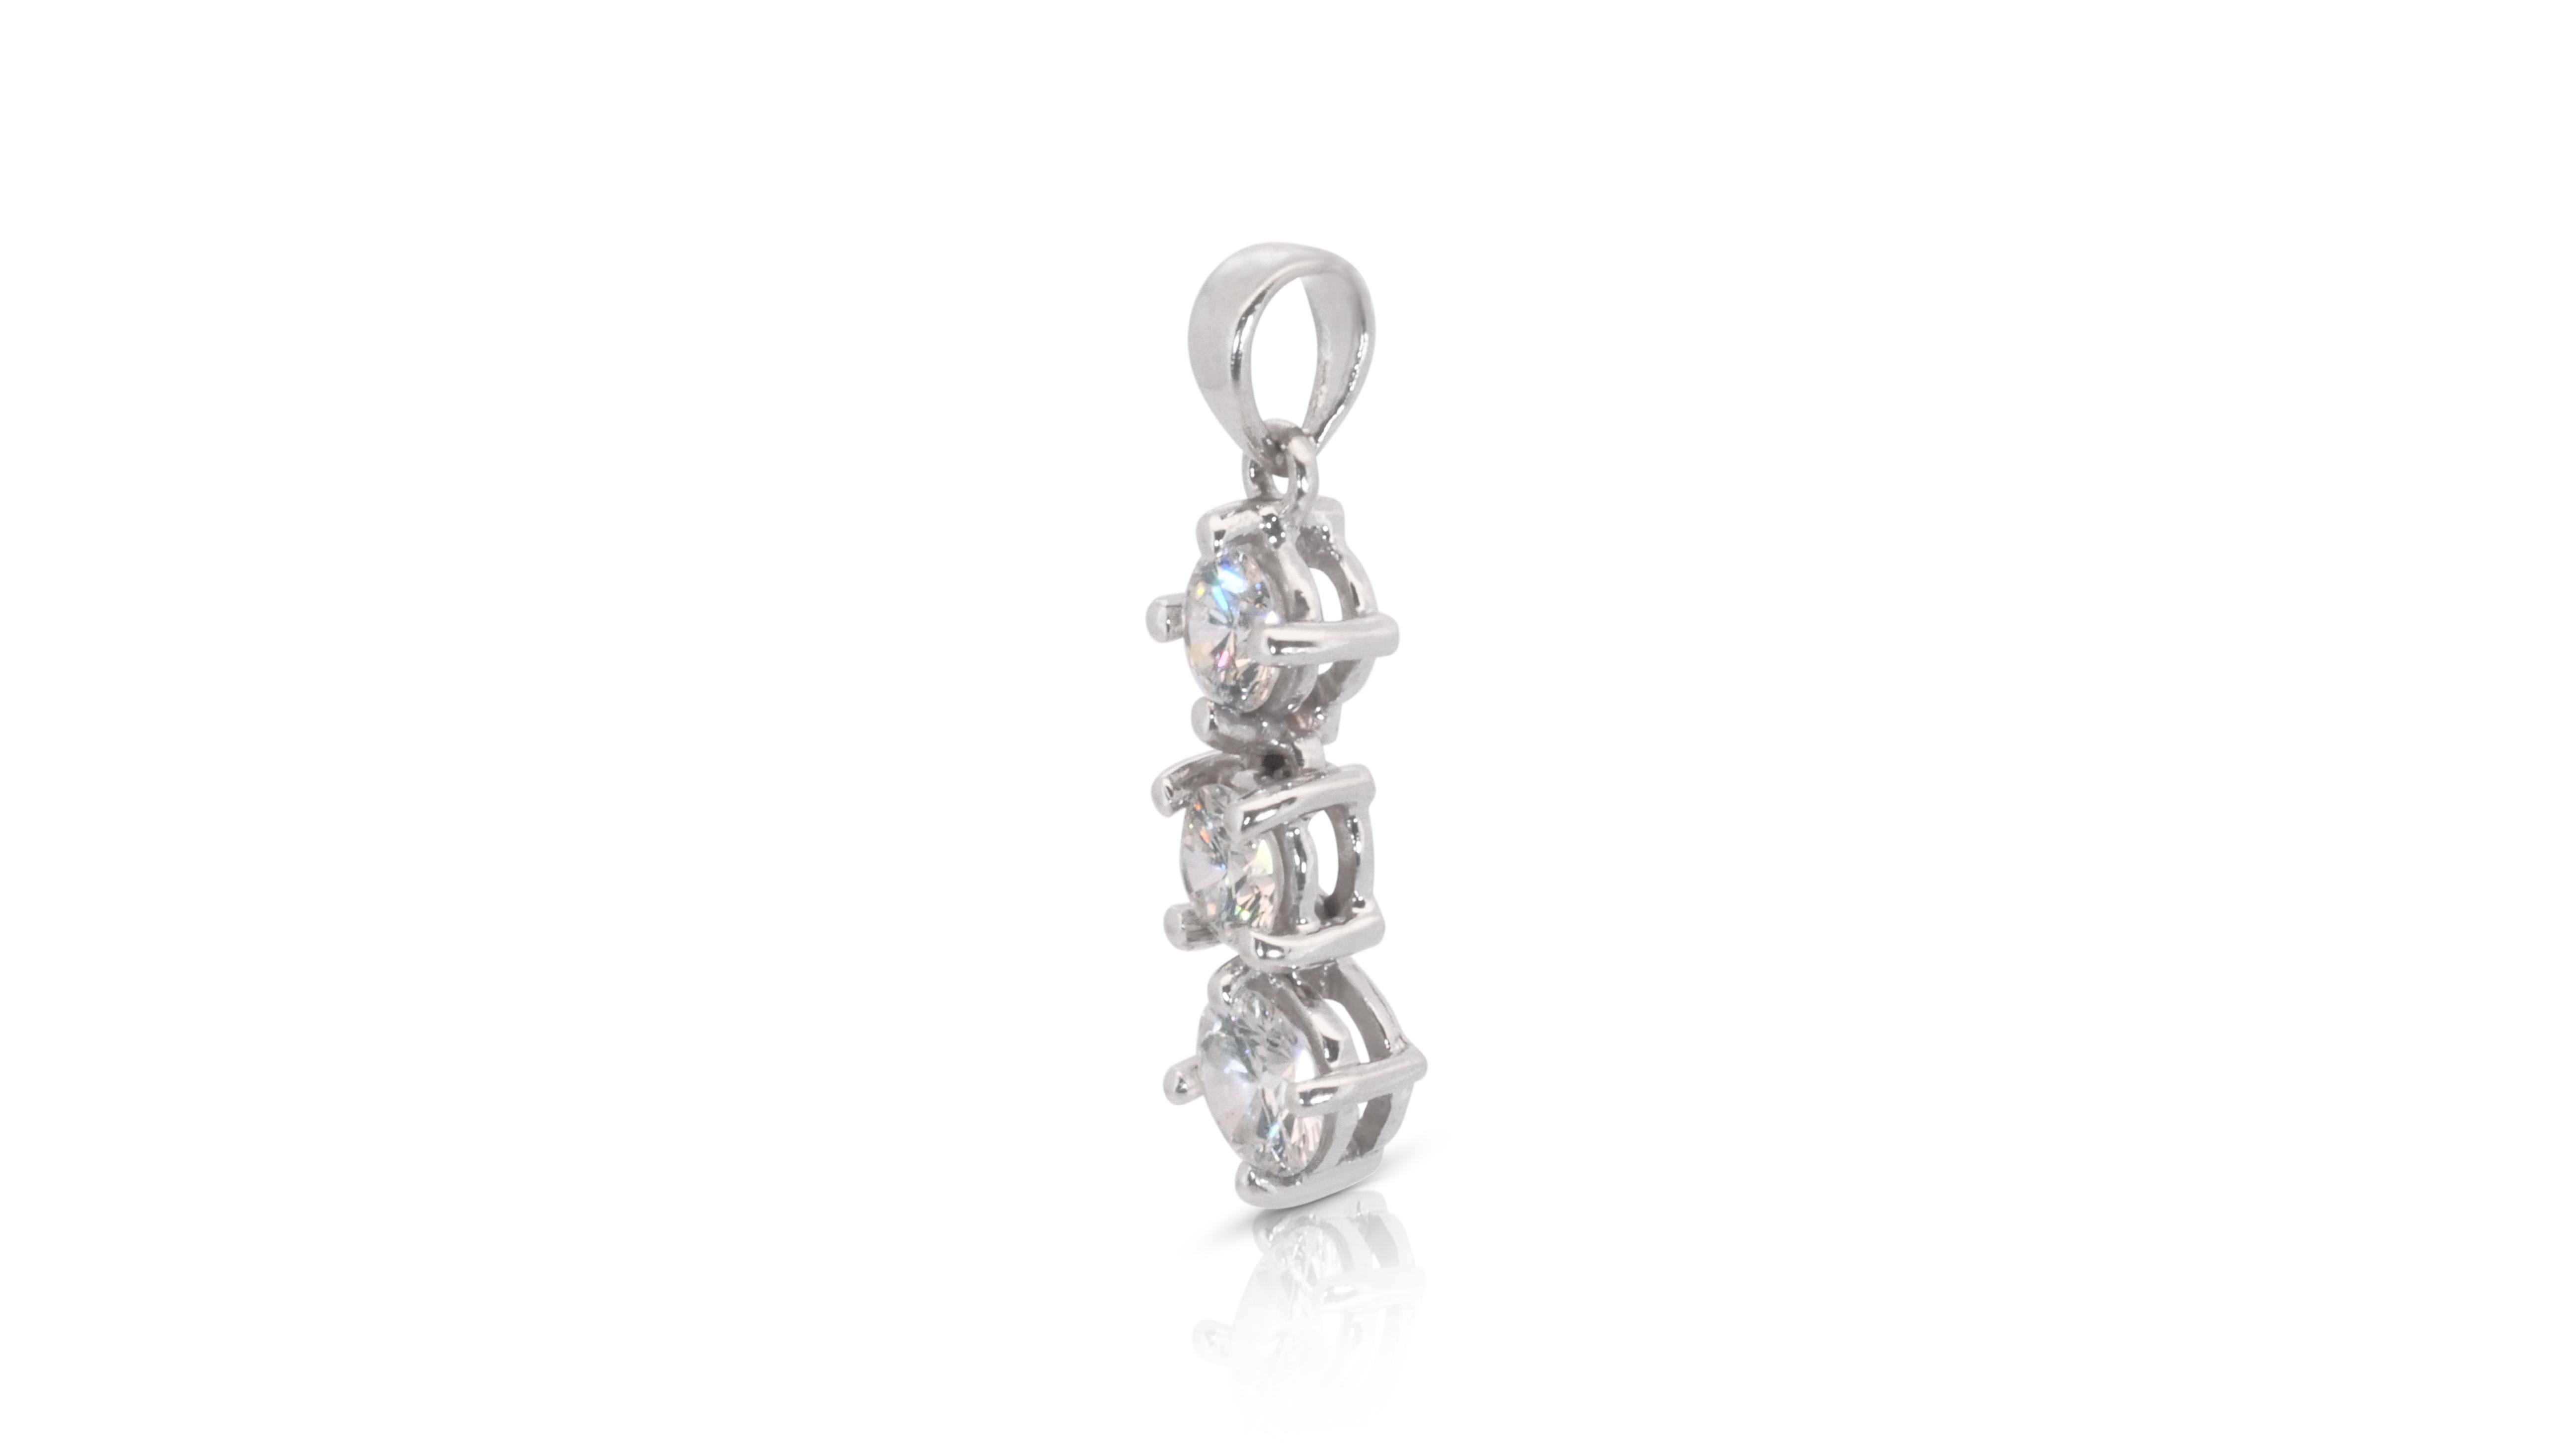 An elegant drop pendant with dazzling 0.52 carat round brilliant diamonds. The jewelry is made of platinum with a high quality polish. It comes with a fancy jewelry box. No chain is included.

3 diamonds main stone total of: 0.52 carat
cut: round